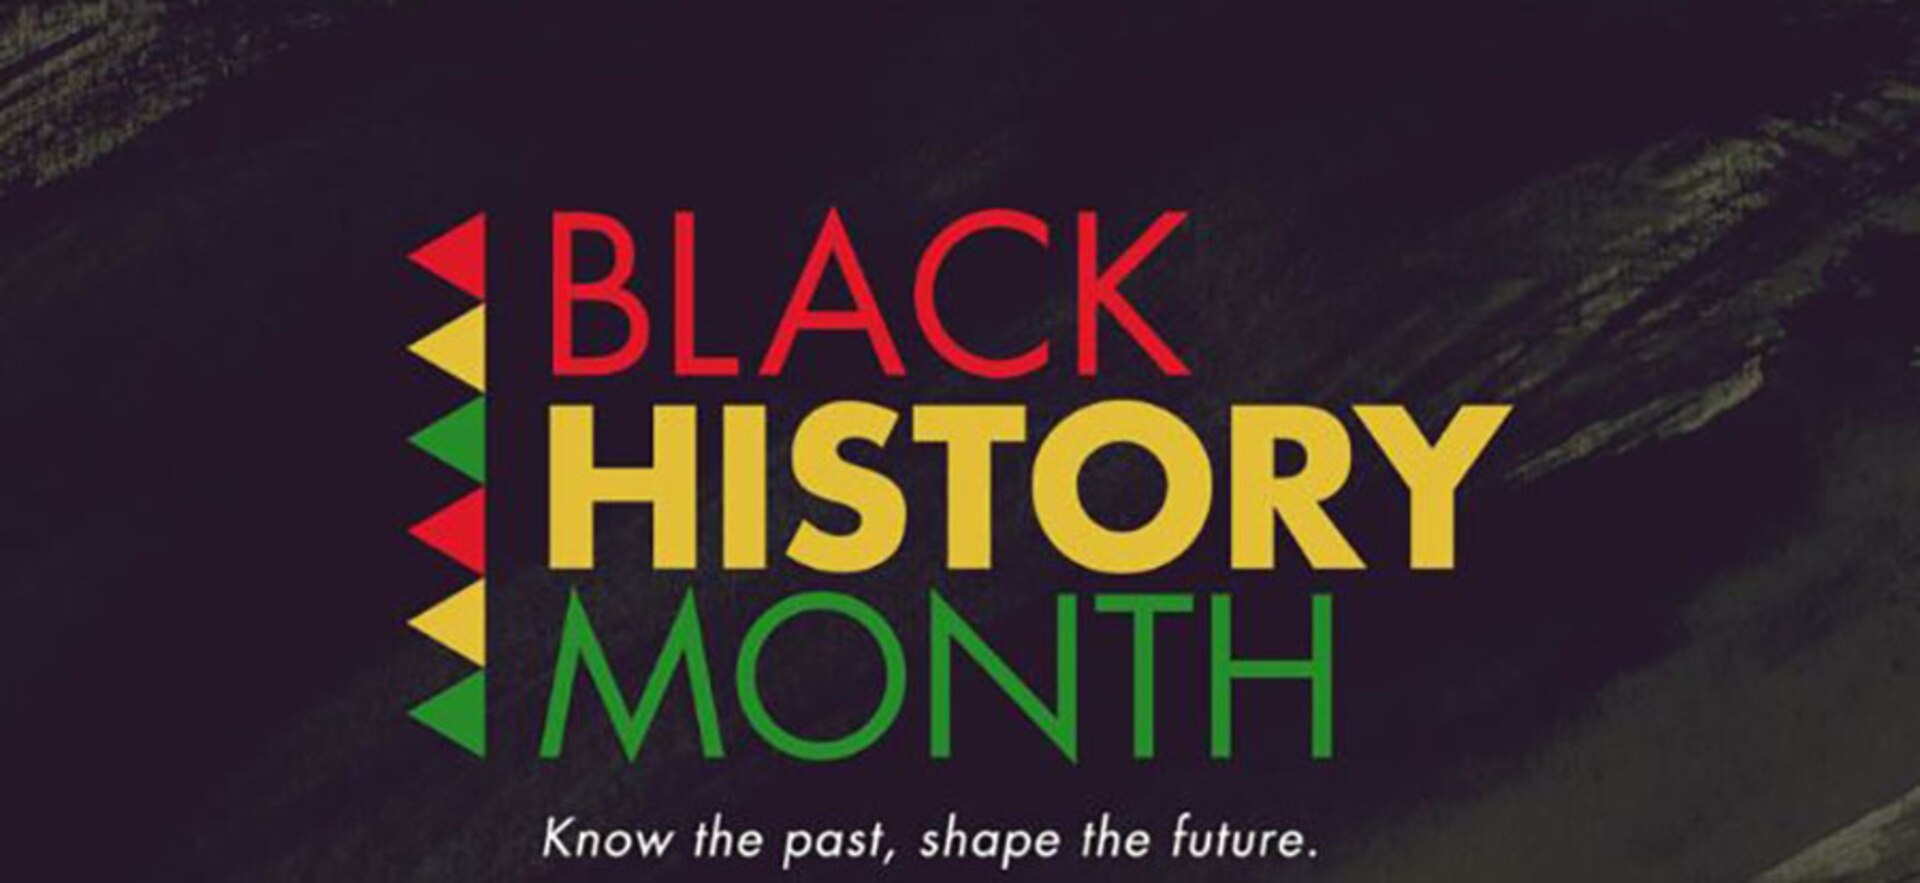 Art work reads Black History Month in large type, in smaller type, Know the past, shape the future.